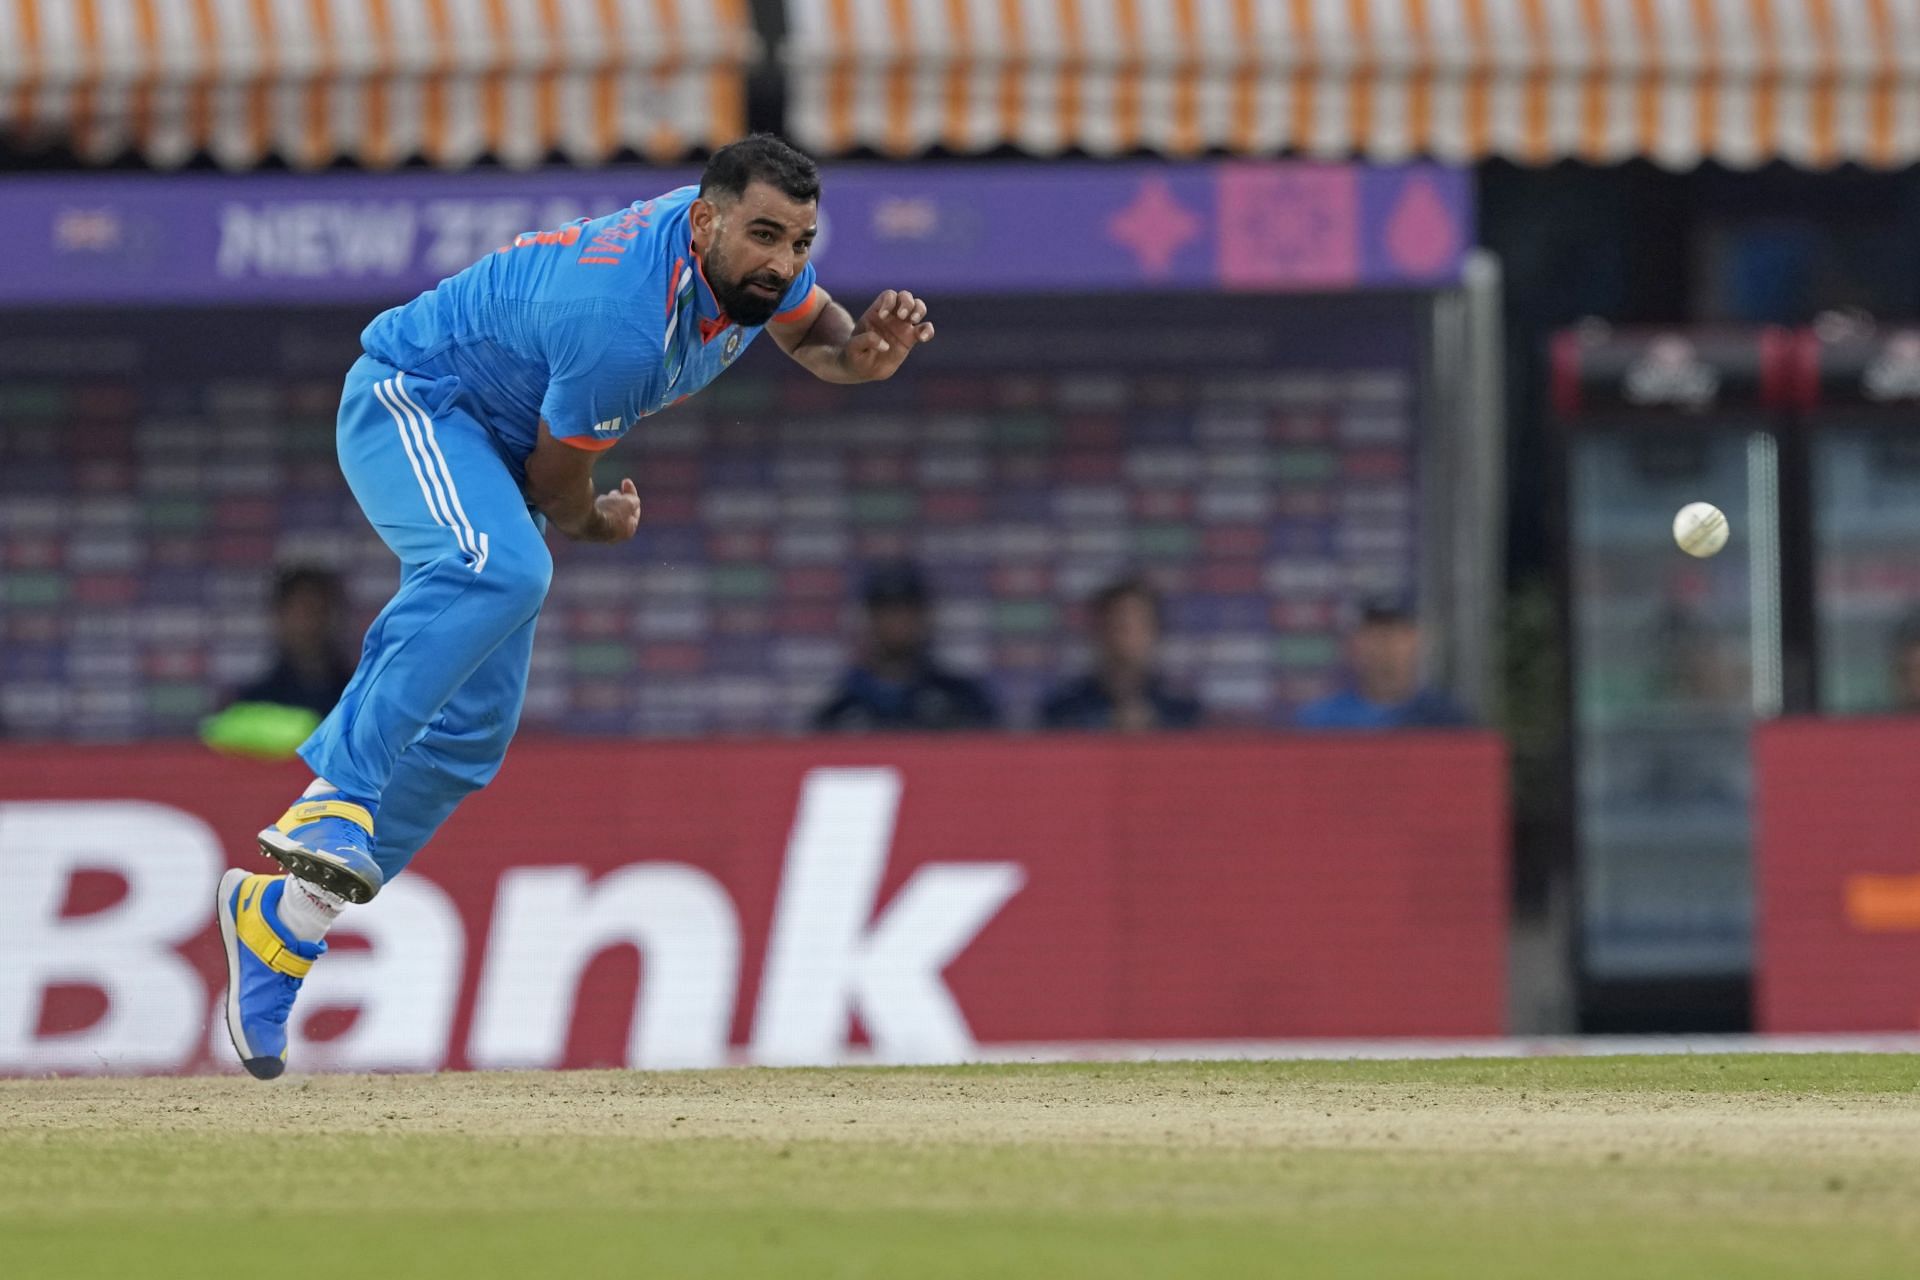 Mohammed Shami has excelled in the last five matches he has played in ODI World Cups. [P/C: AP]